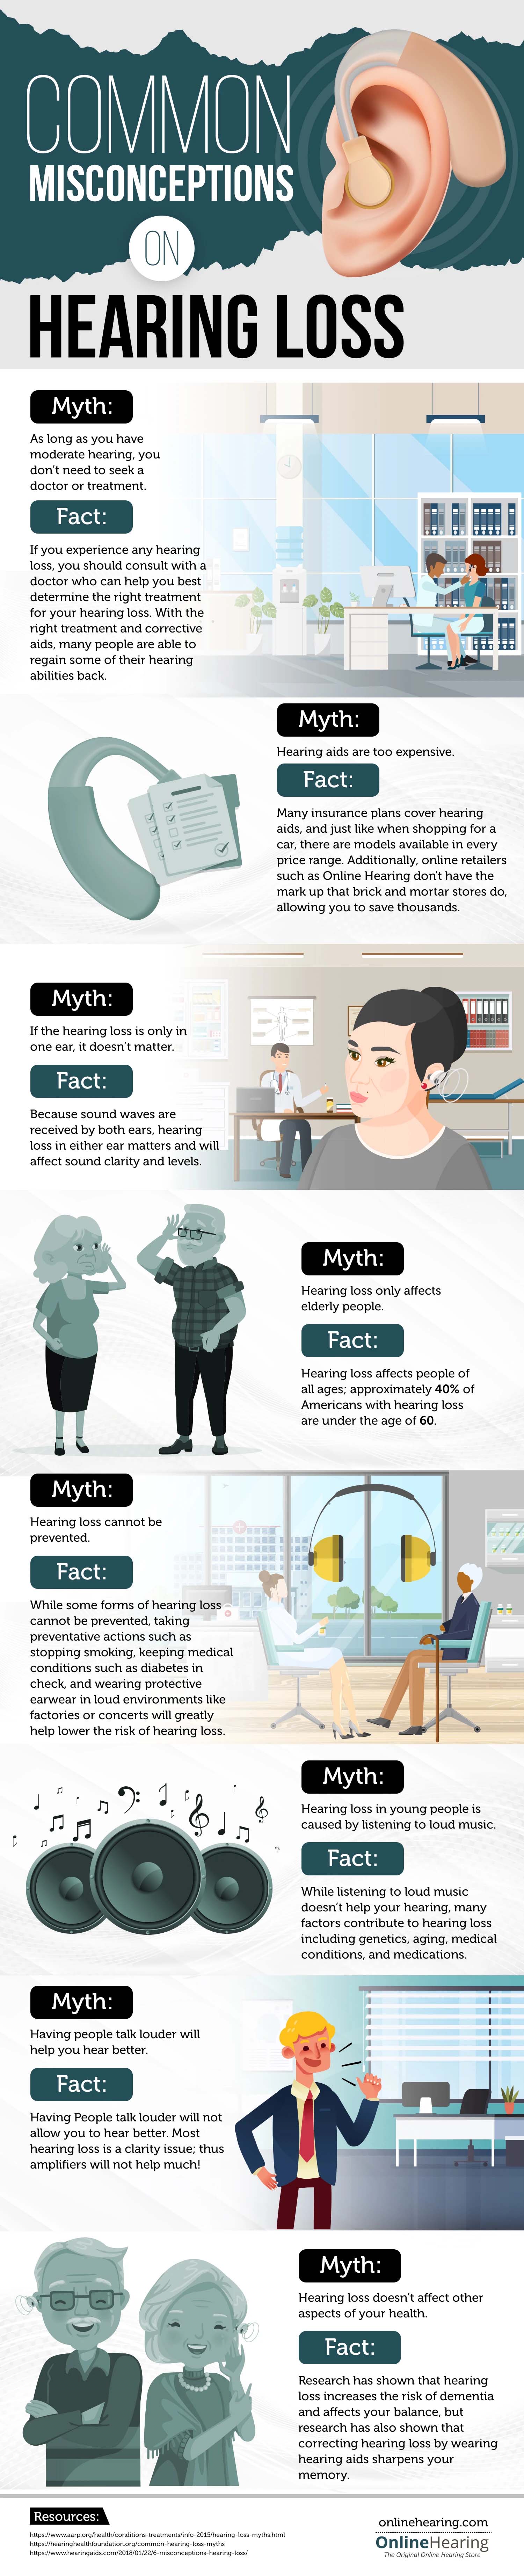 Common Misconceptions on Hearing Loss